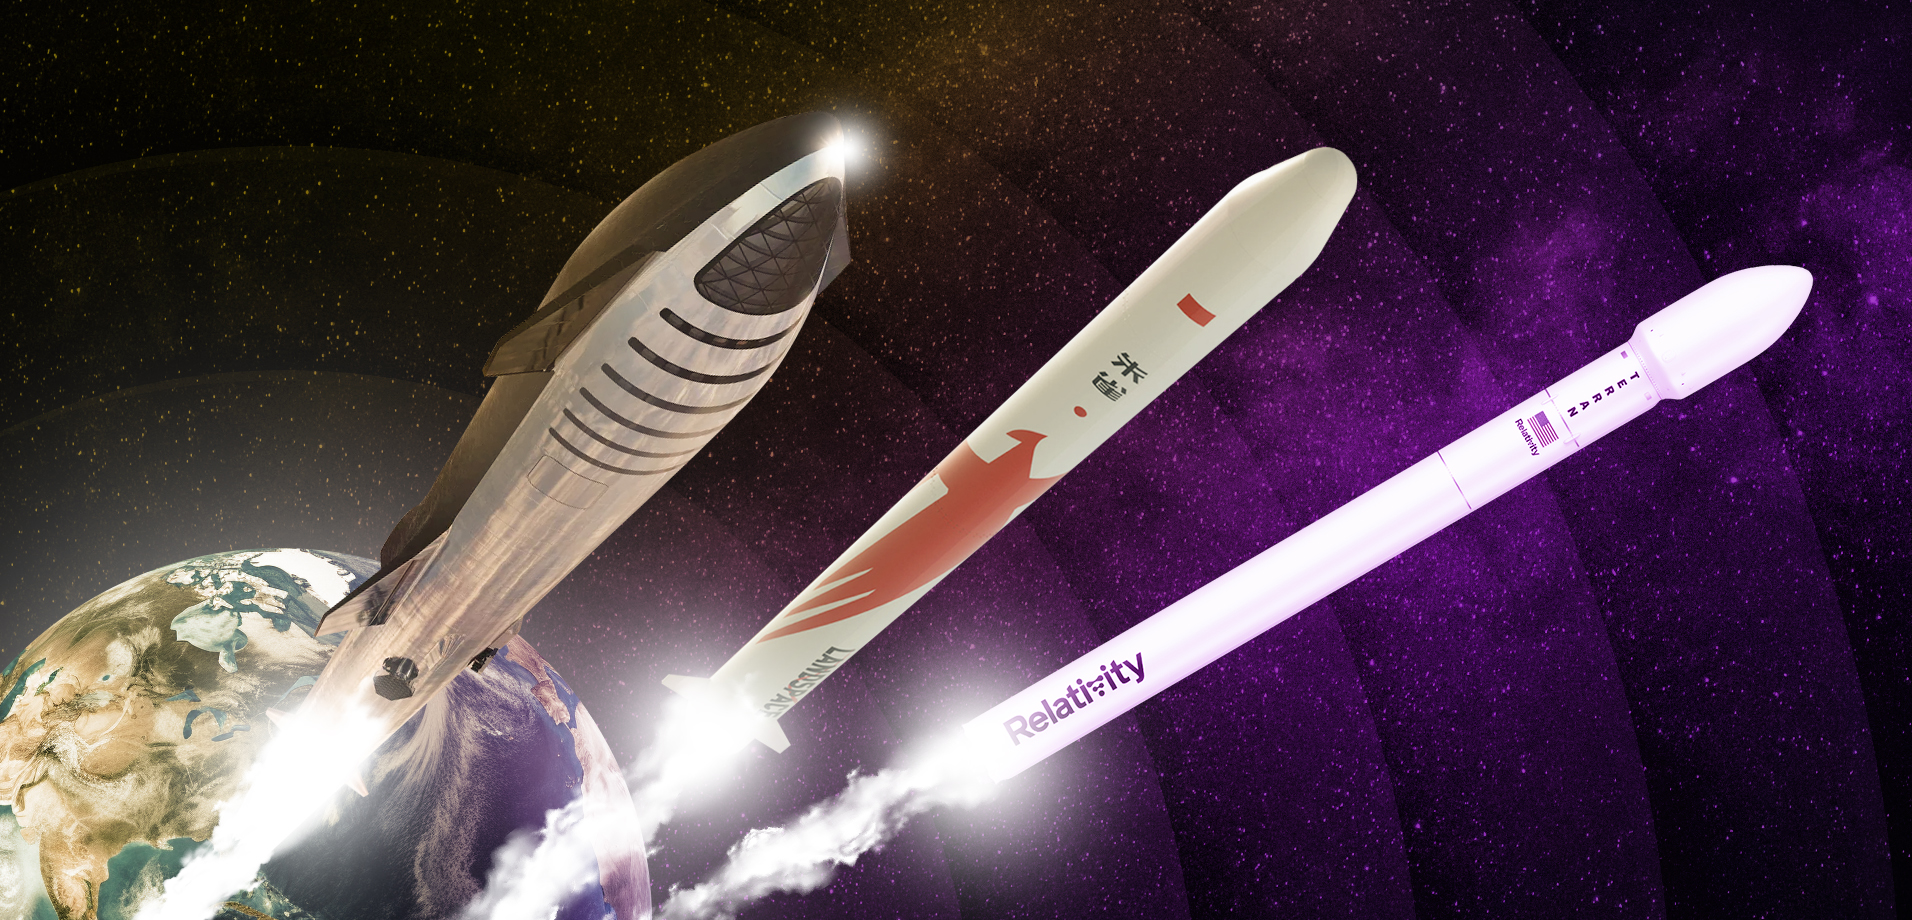 Methane Rockets: Look Who’s Leading The Methane Space Race